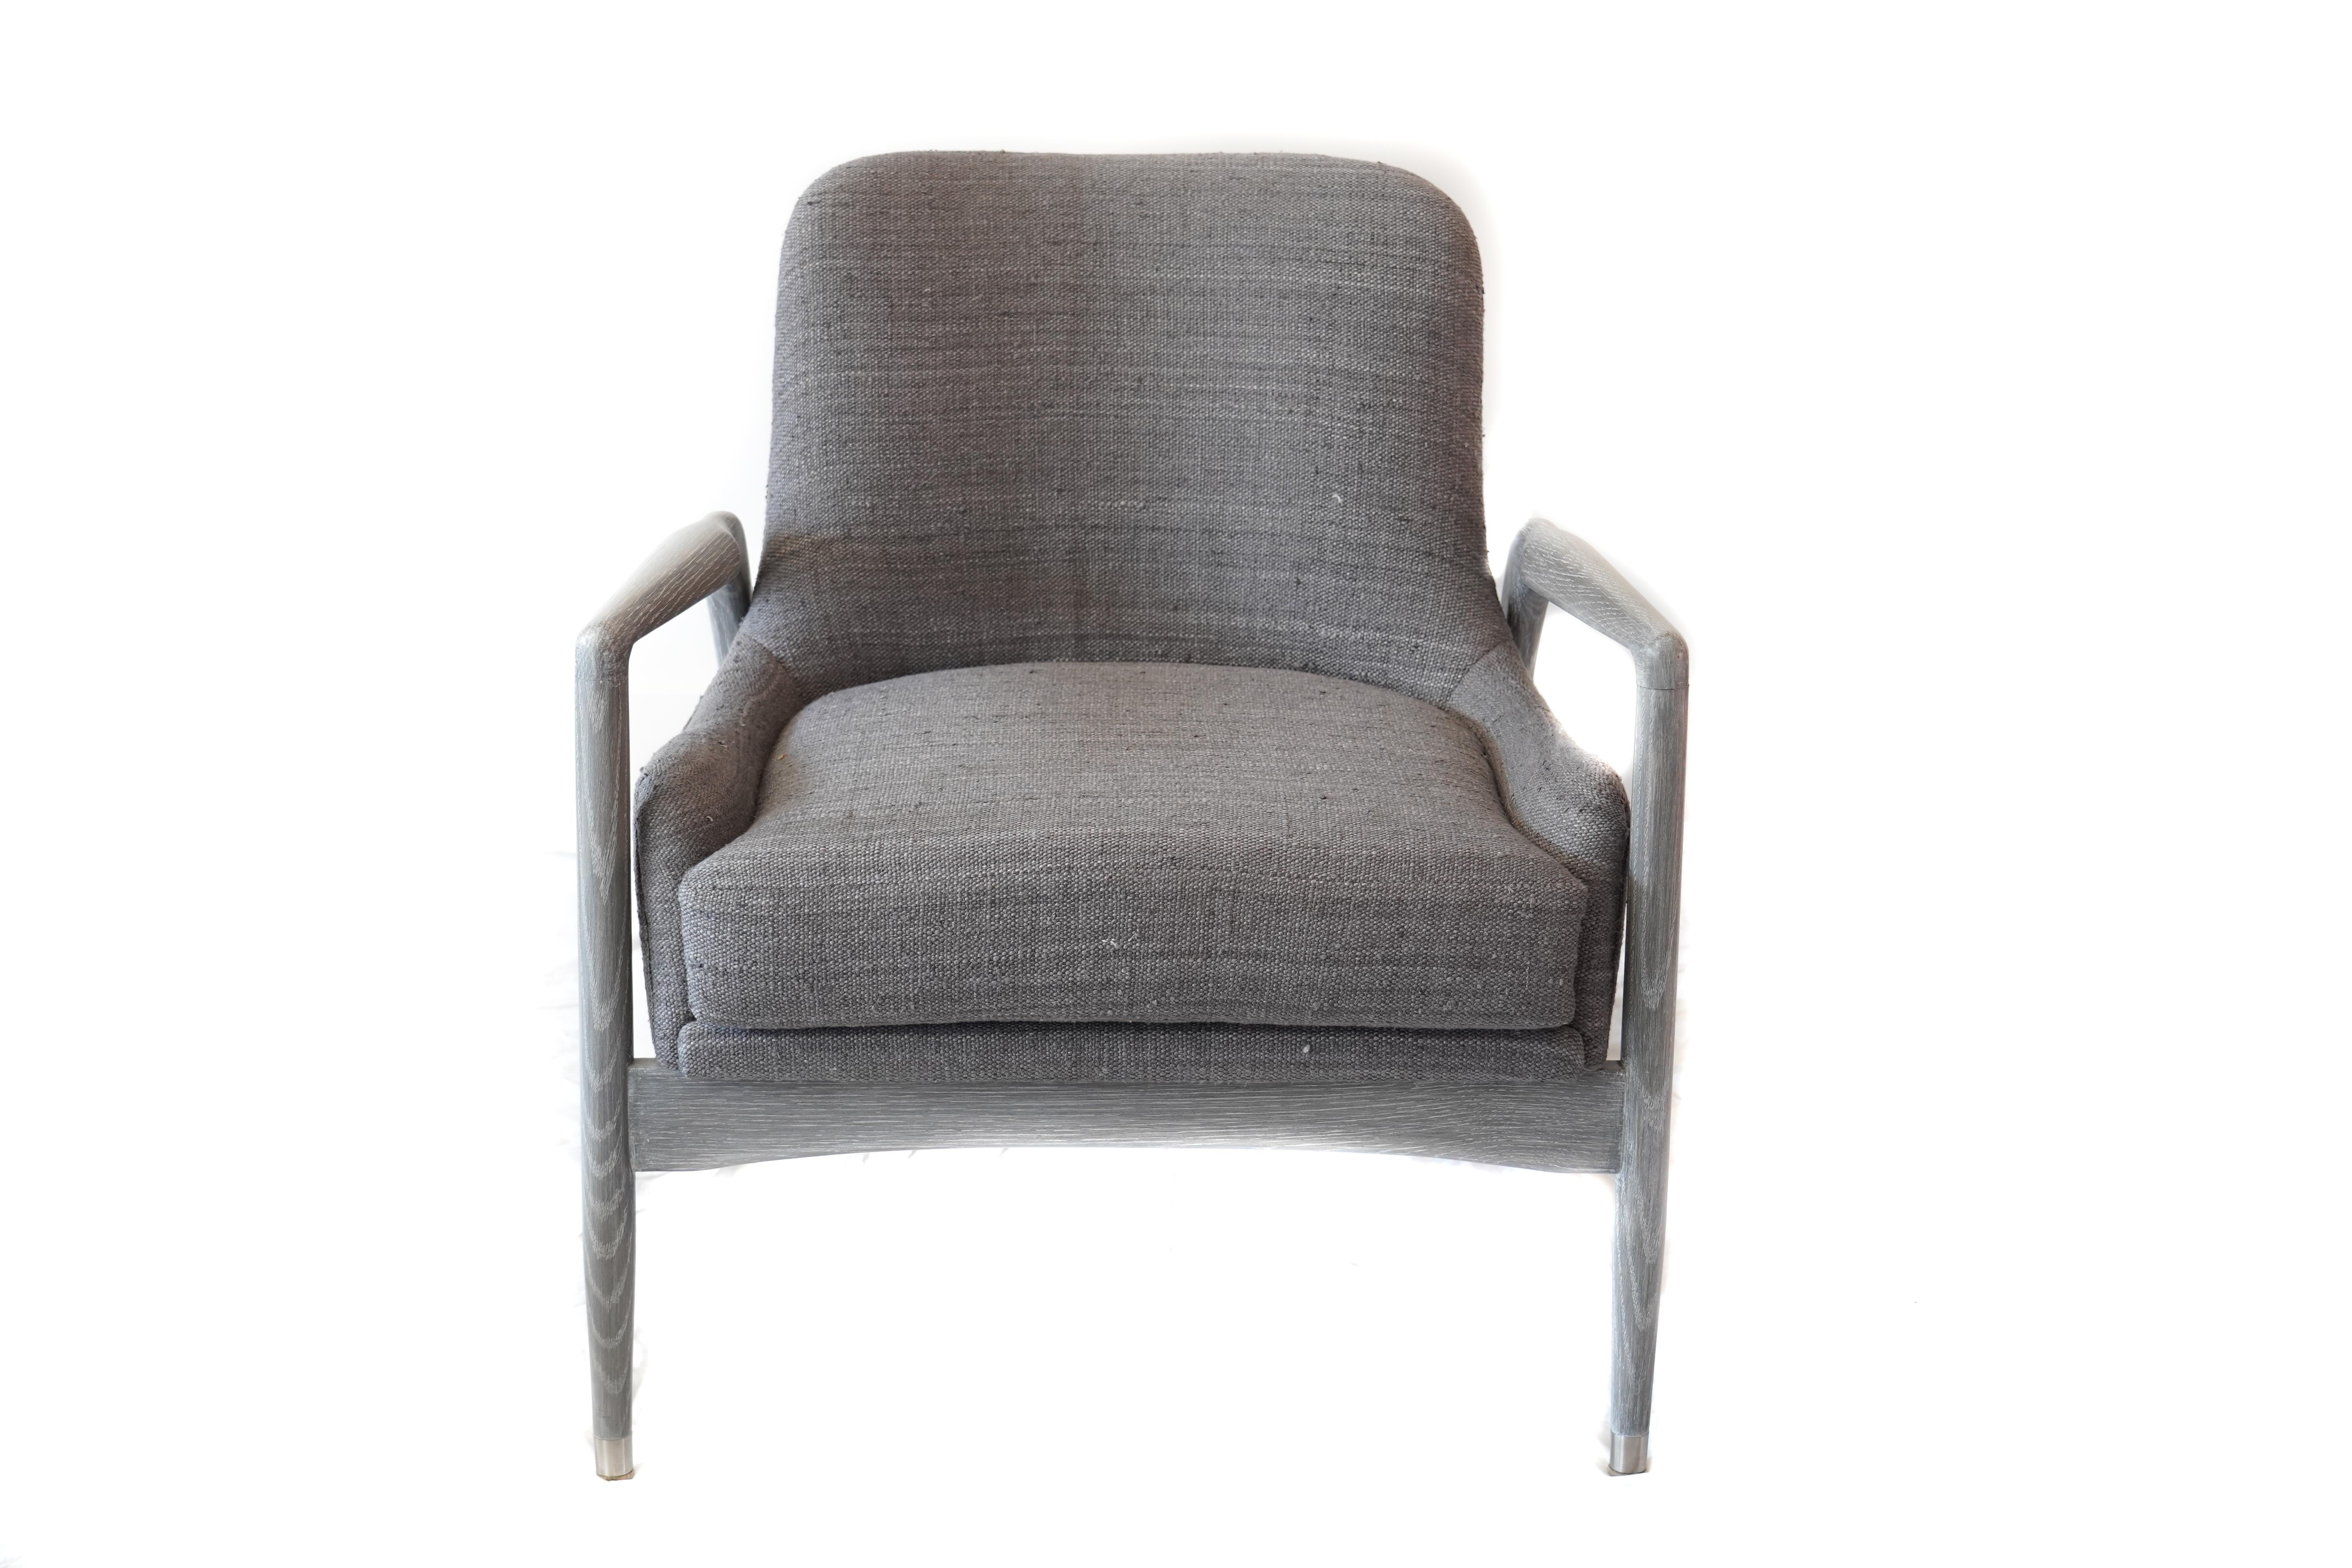 This elegant linen and silk upholstered armchair with a dove grey oak frame evokes clean mid-century lines while providing a comfortable seating experience. The upholstery of the chair provides textured interest and creates a unique visual effect